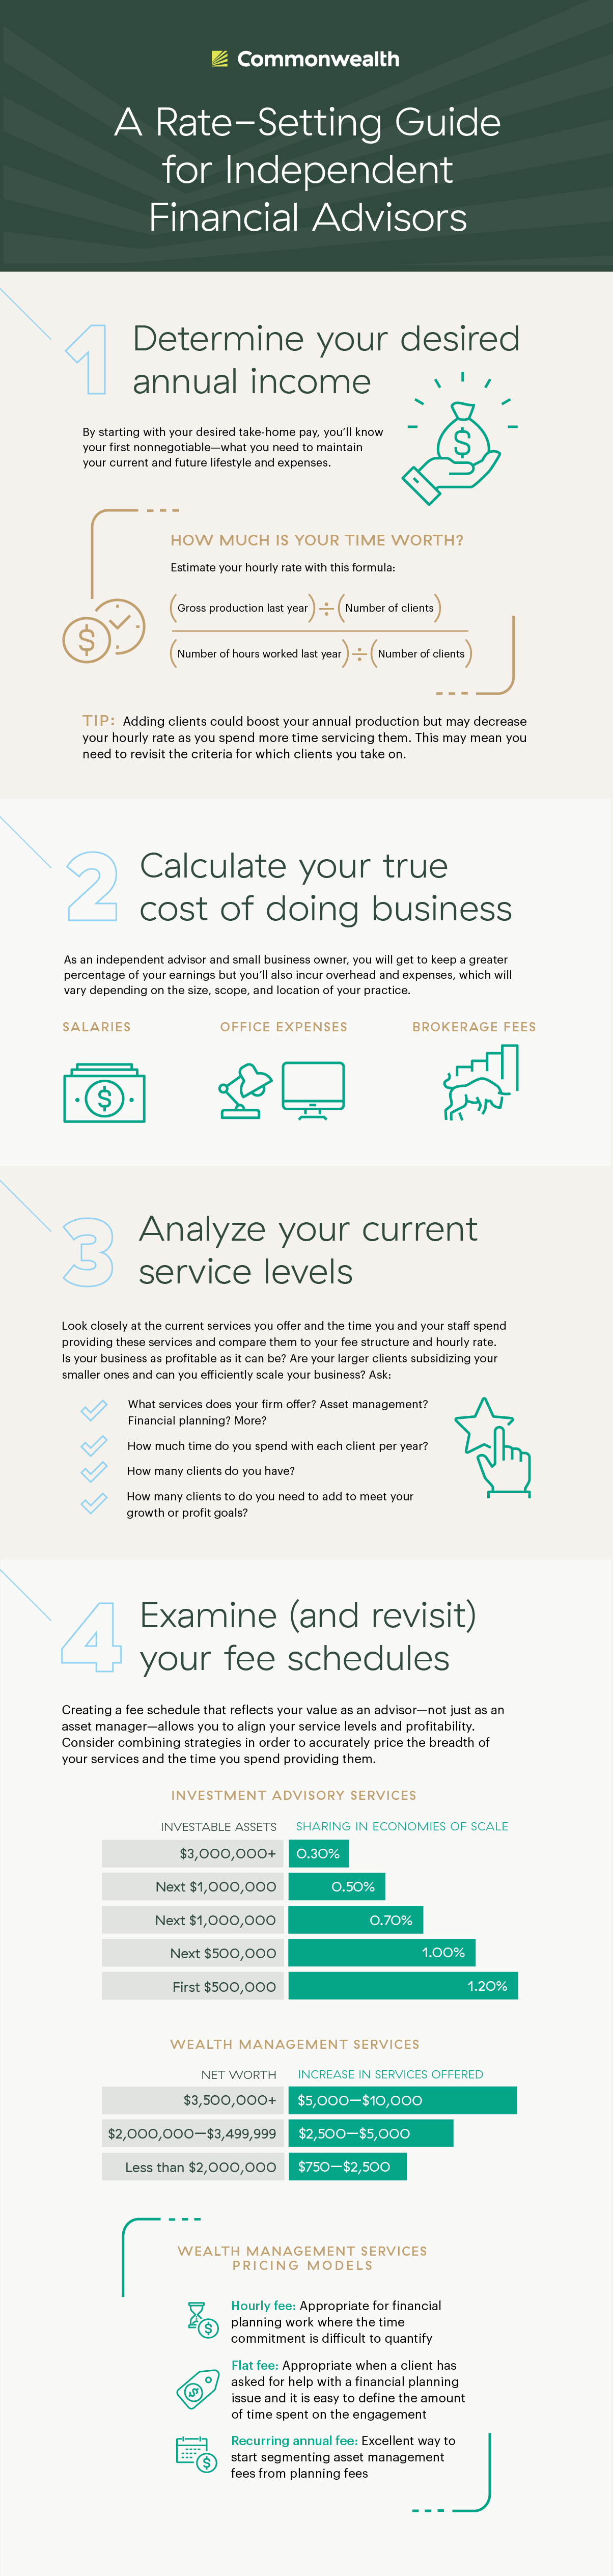 How-to-Price-Your-Business-Infographic-v6